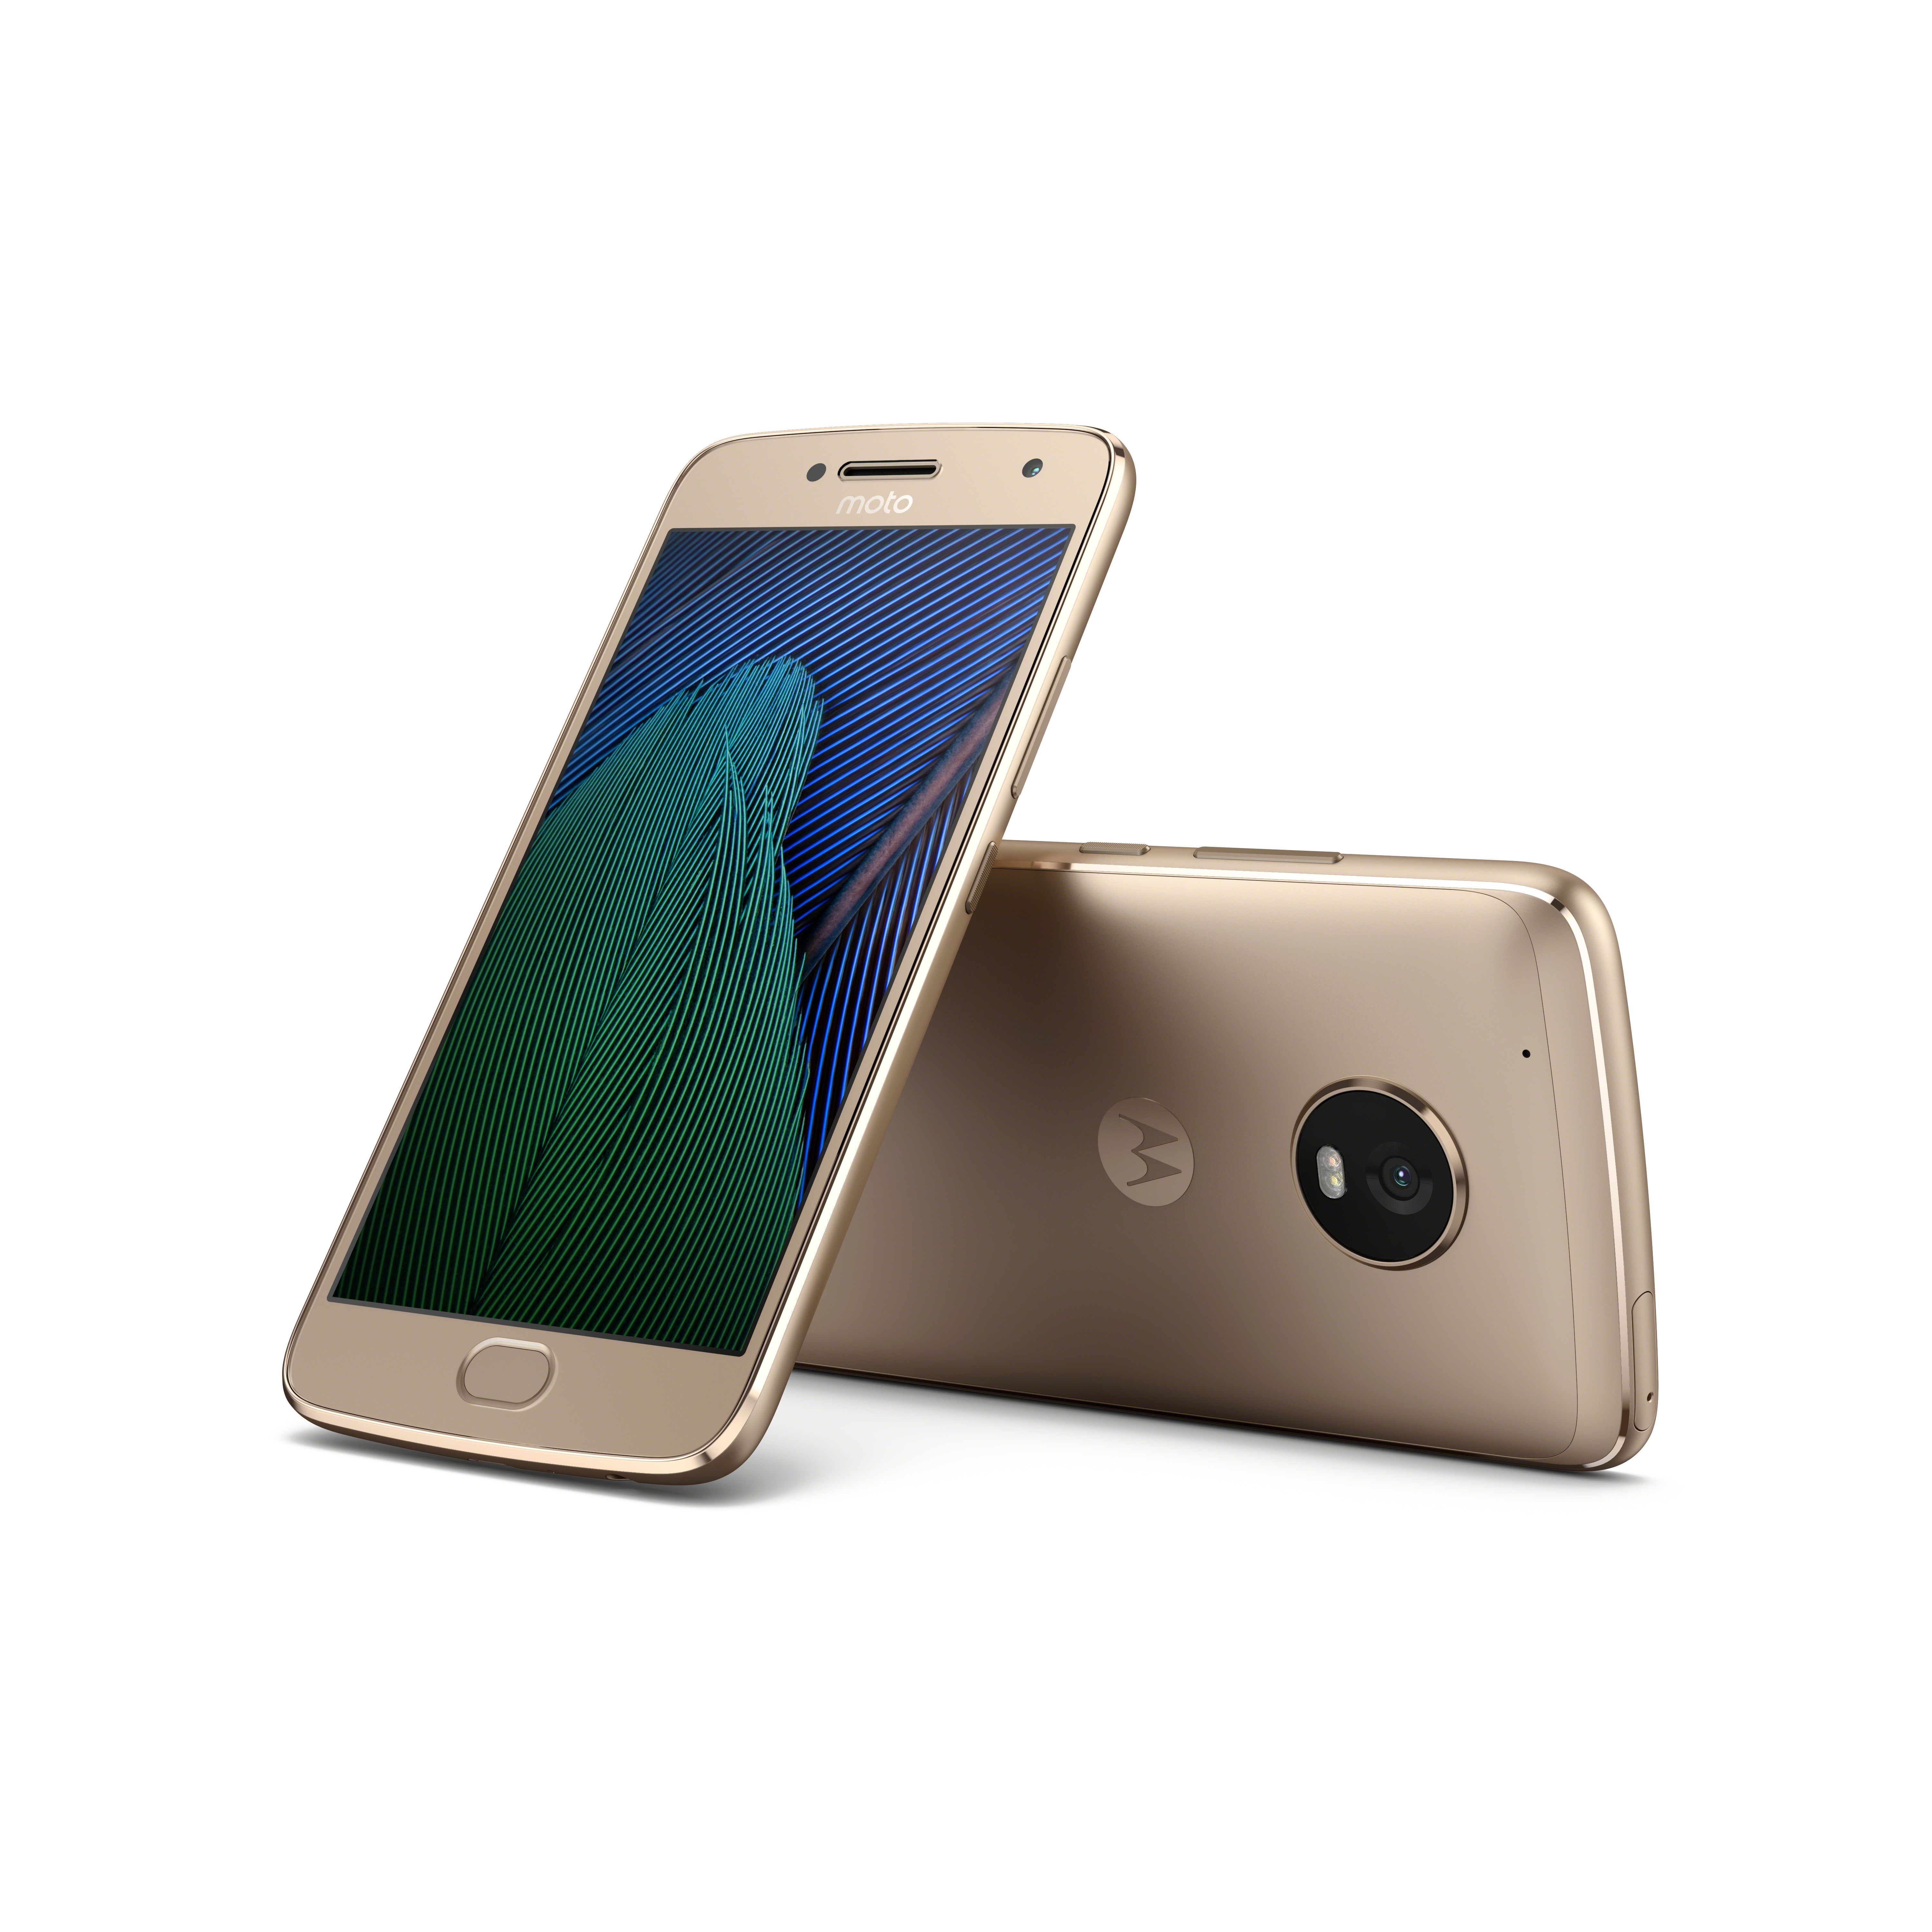 Bergbeklimmer Korting Begraafplaats Moto G5 Plus: An inexpensive Android phone with all the right features